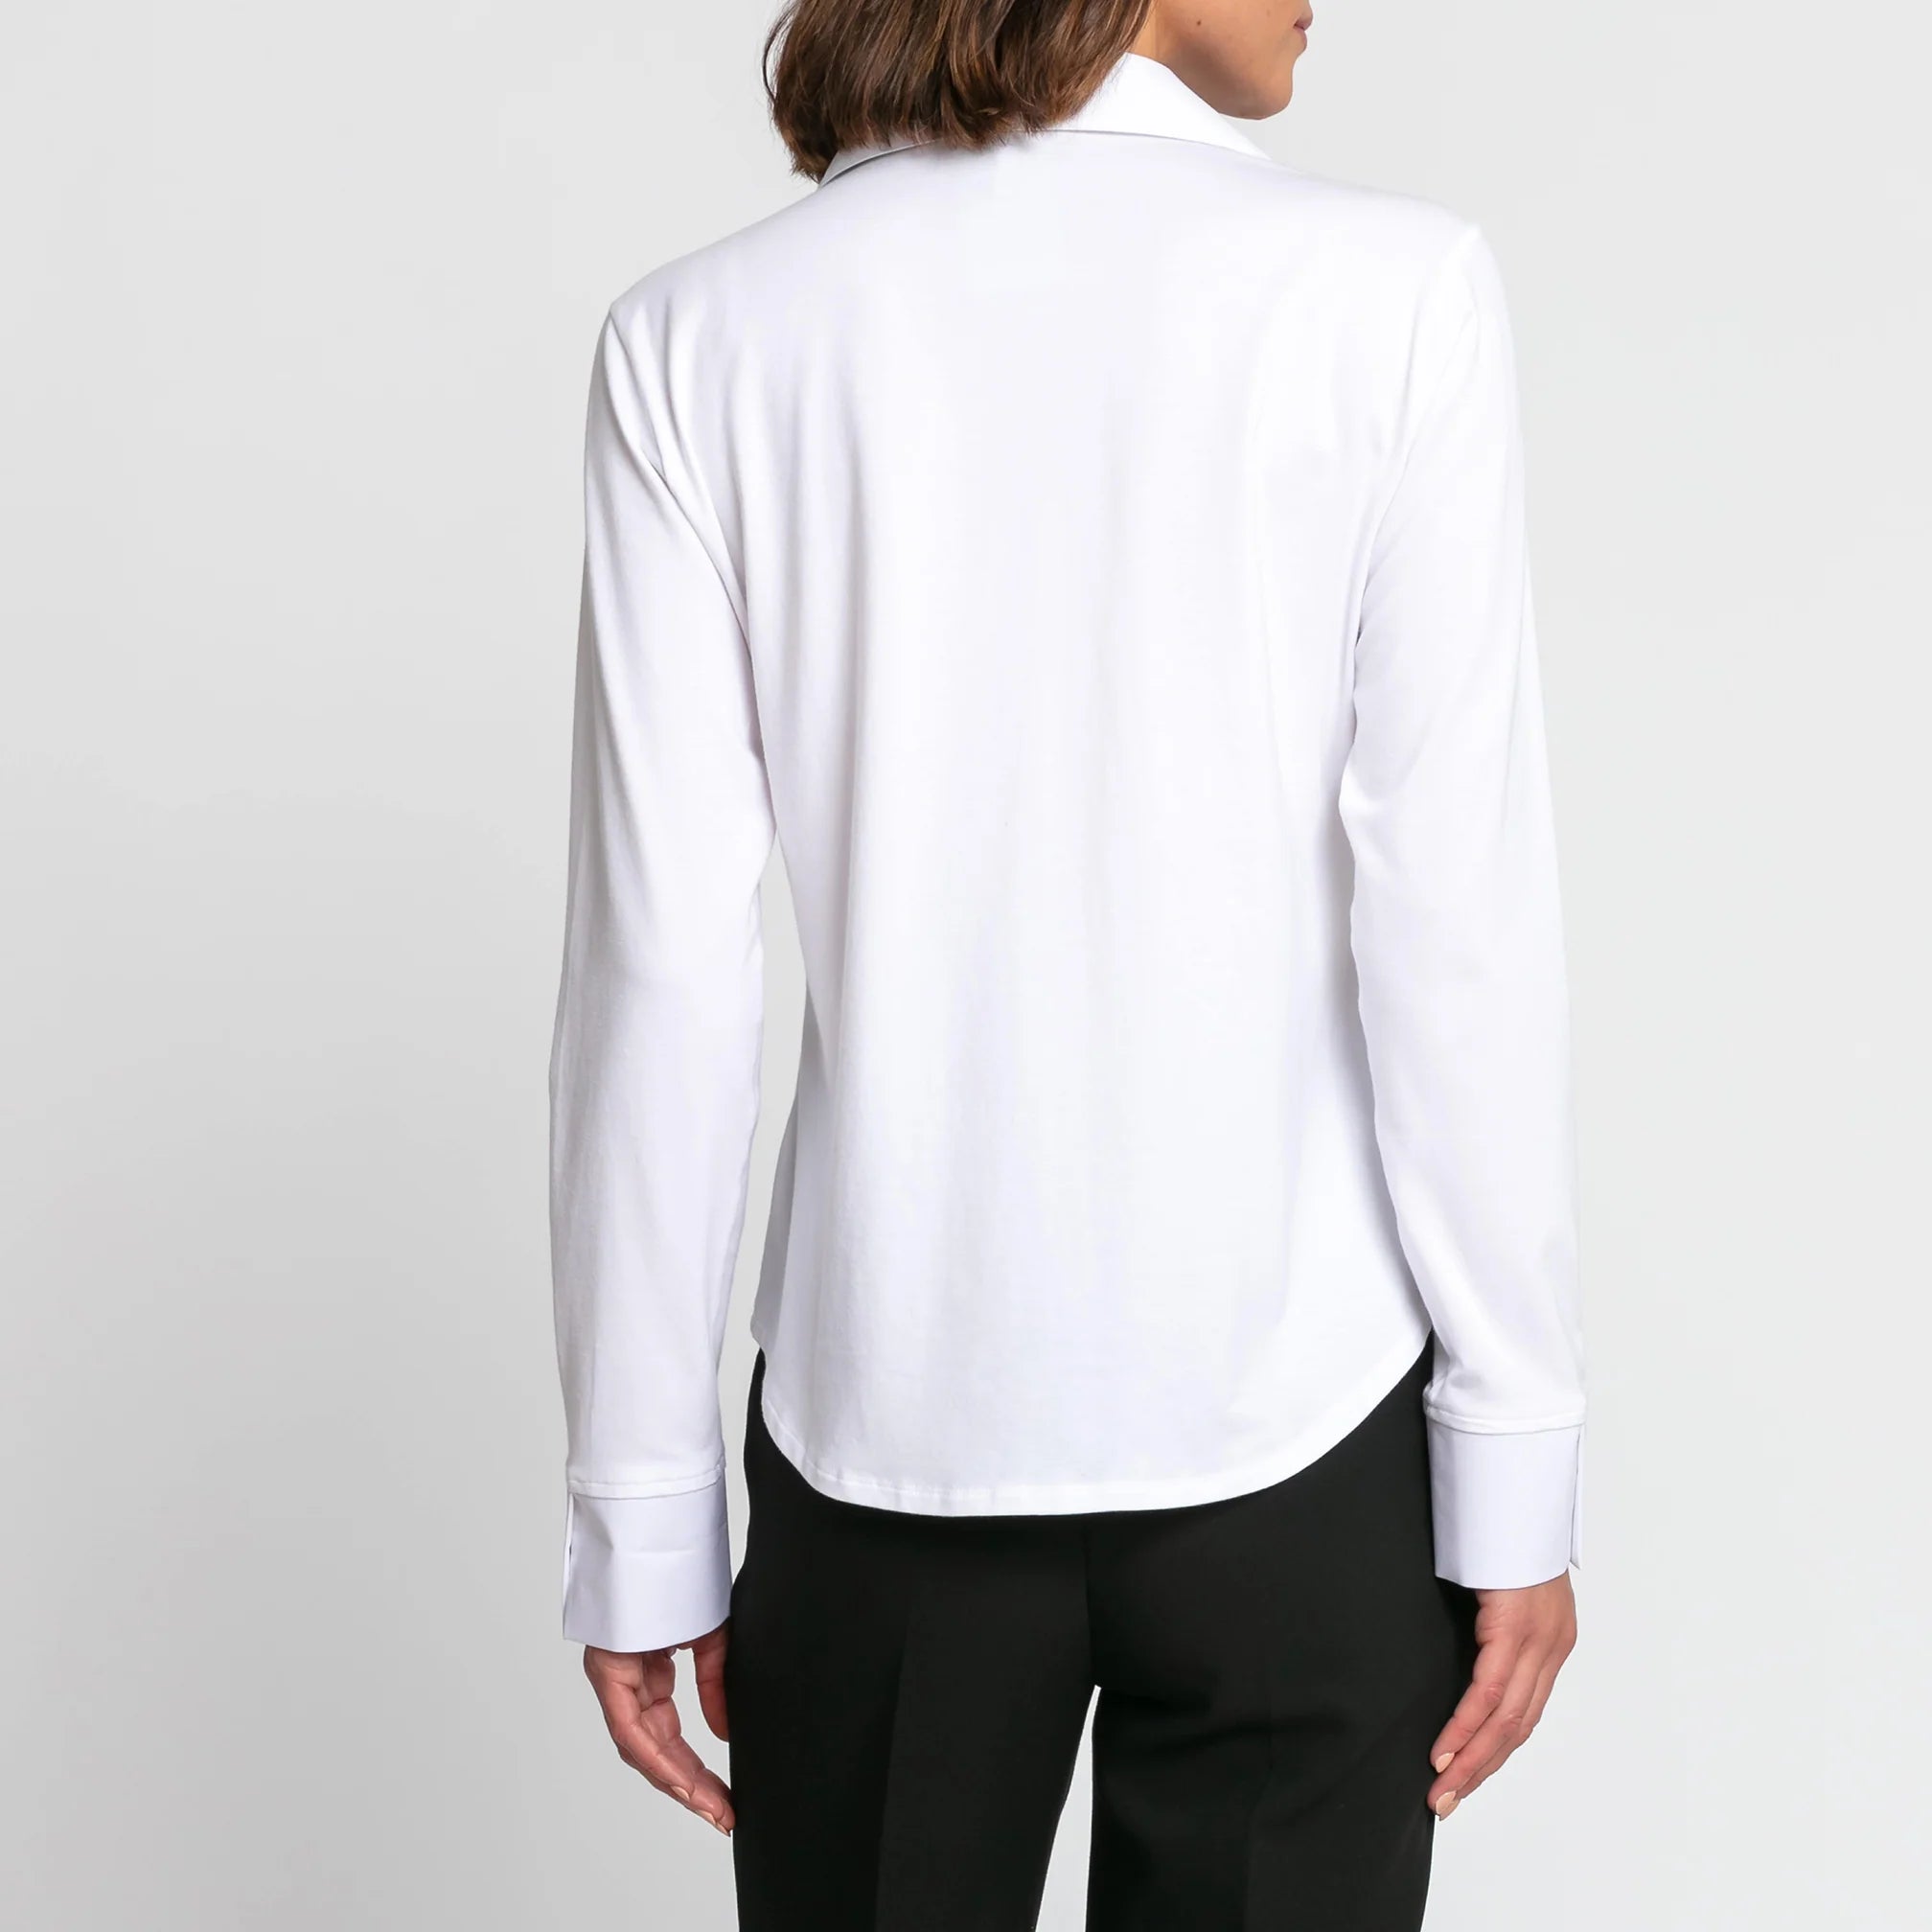 Hinson Wu Leona Long Sleeve Tailored Knit Top - White